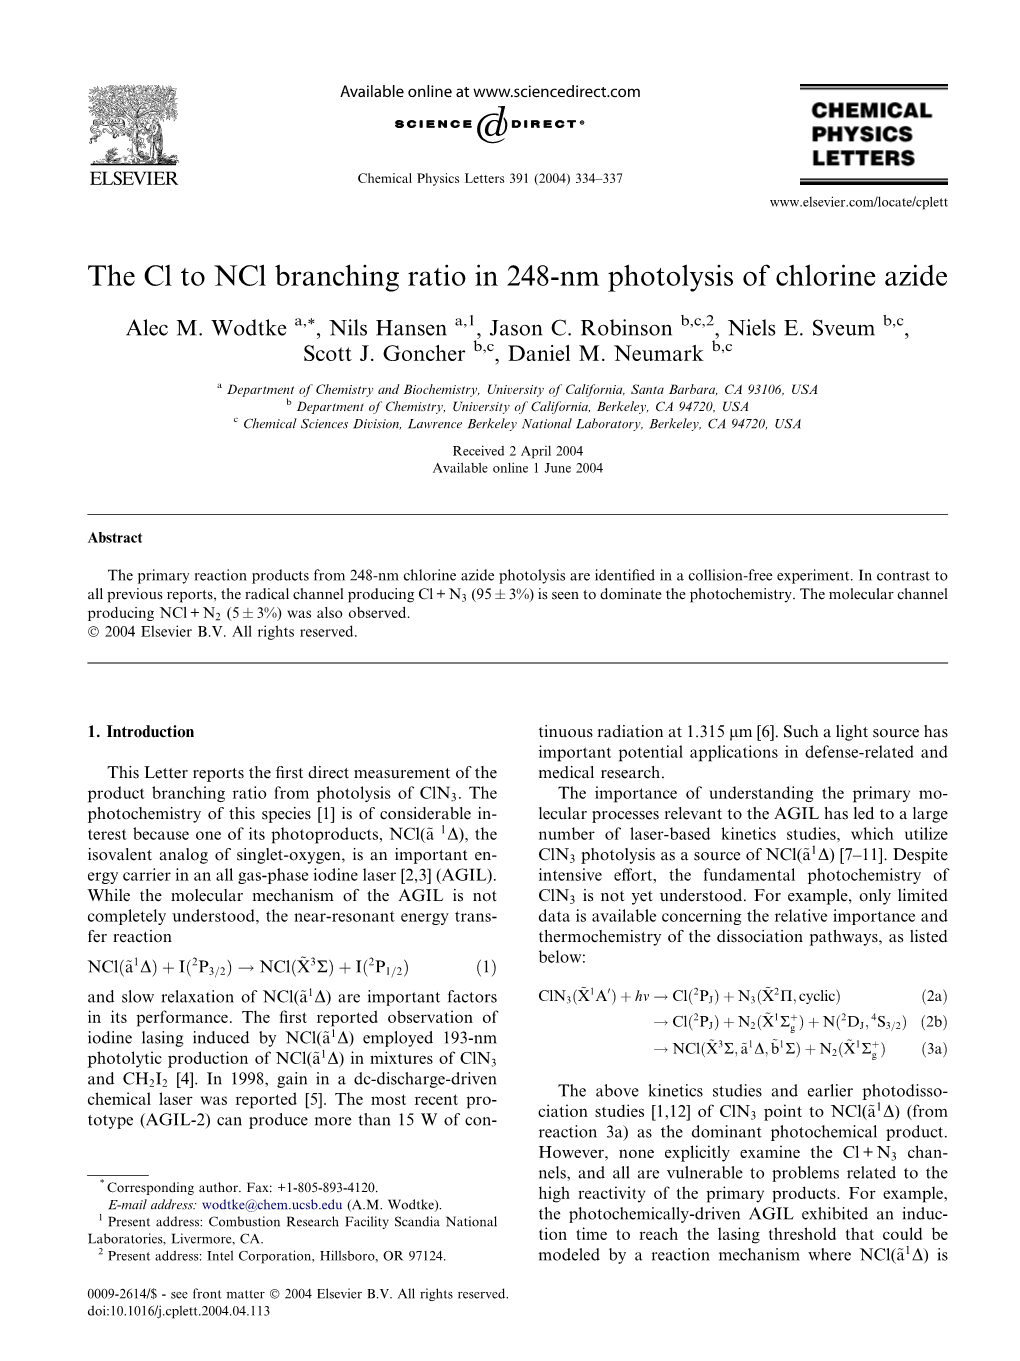 The Cl to Ncl Branching Ratio in 248-Nm Photolysis of Chlorine Azide